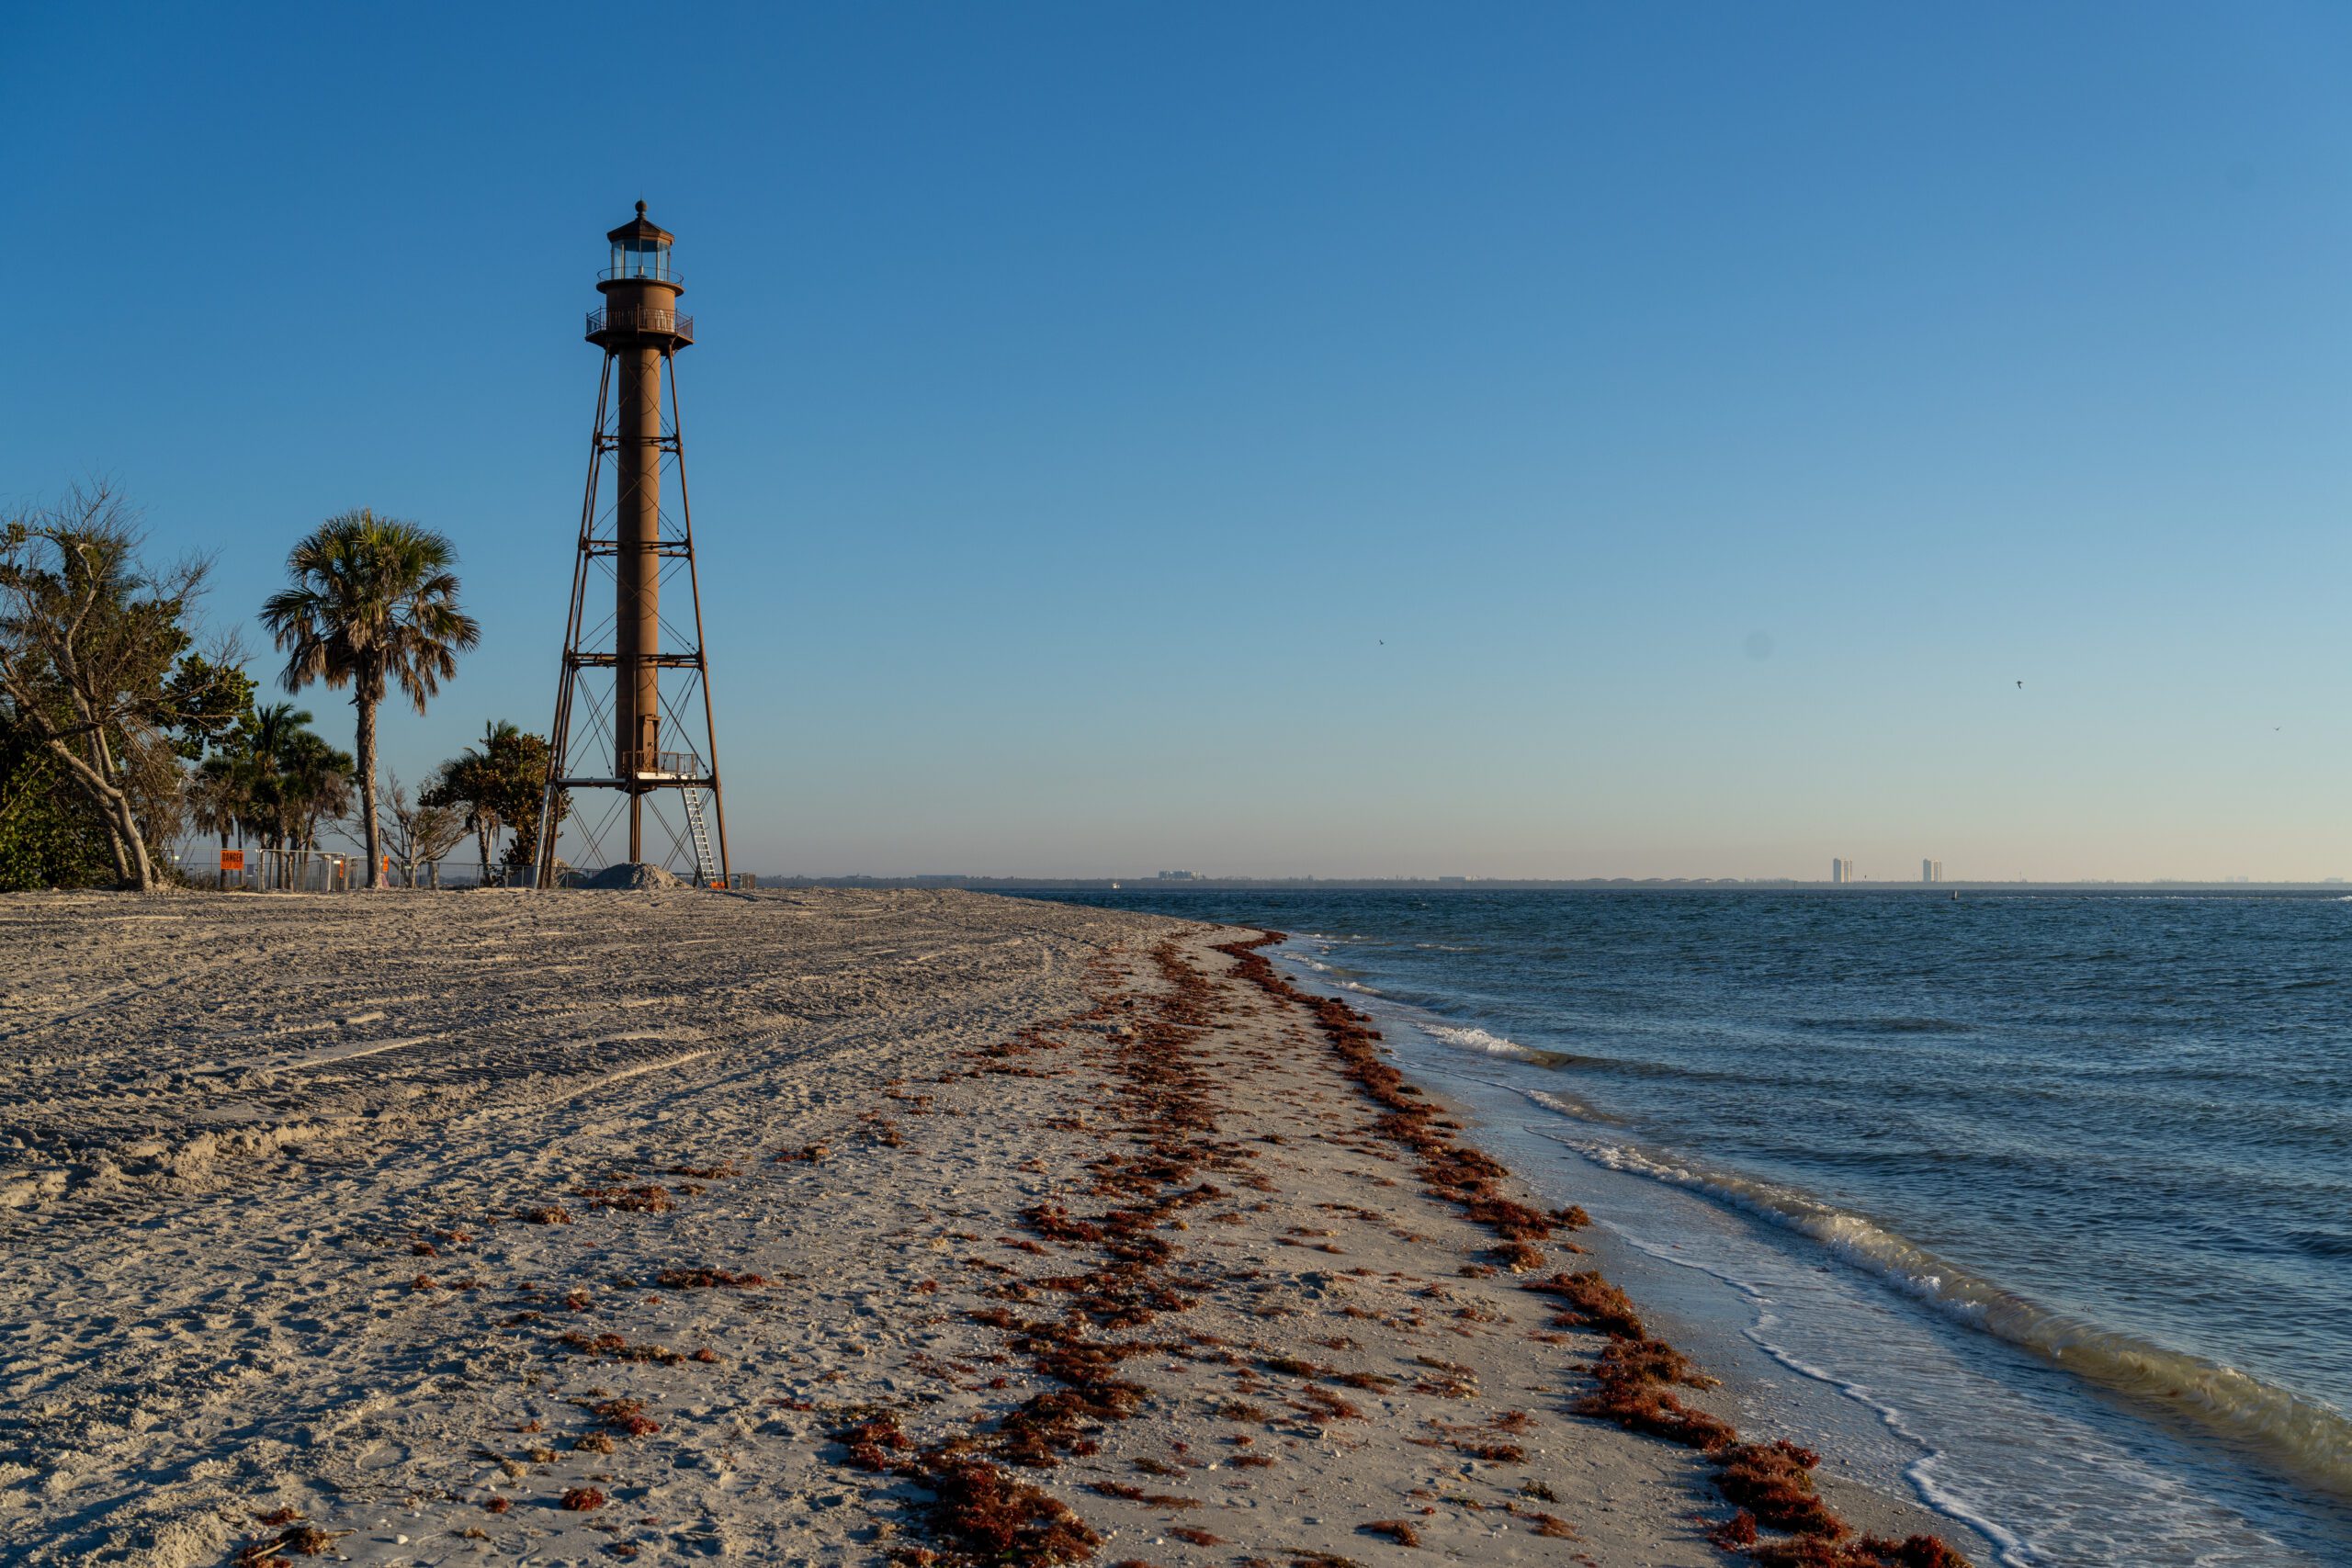 Tech Leader Completes Game-Changing Project on Sanibel Island to Strengthen Community’s Internet Access